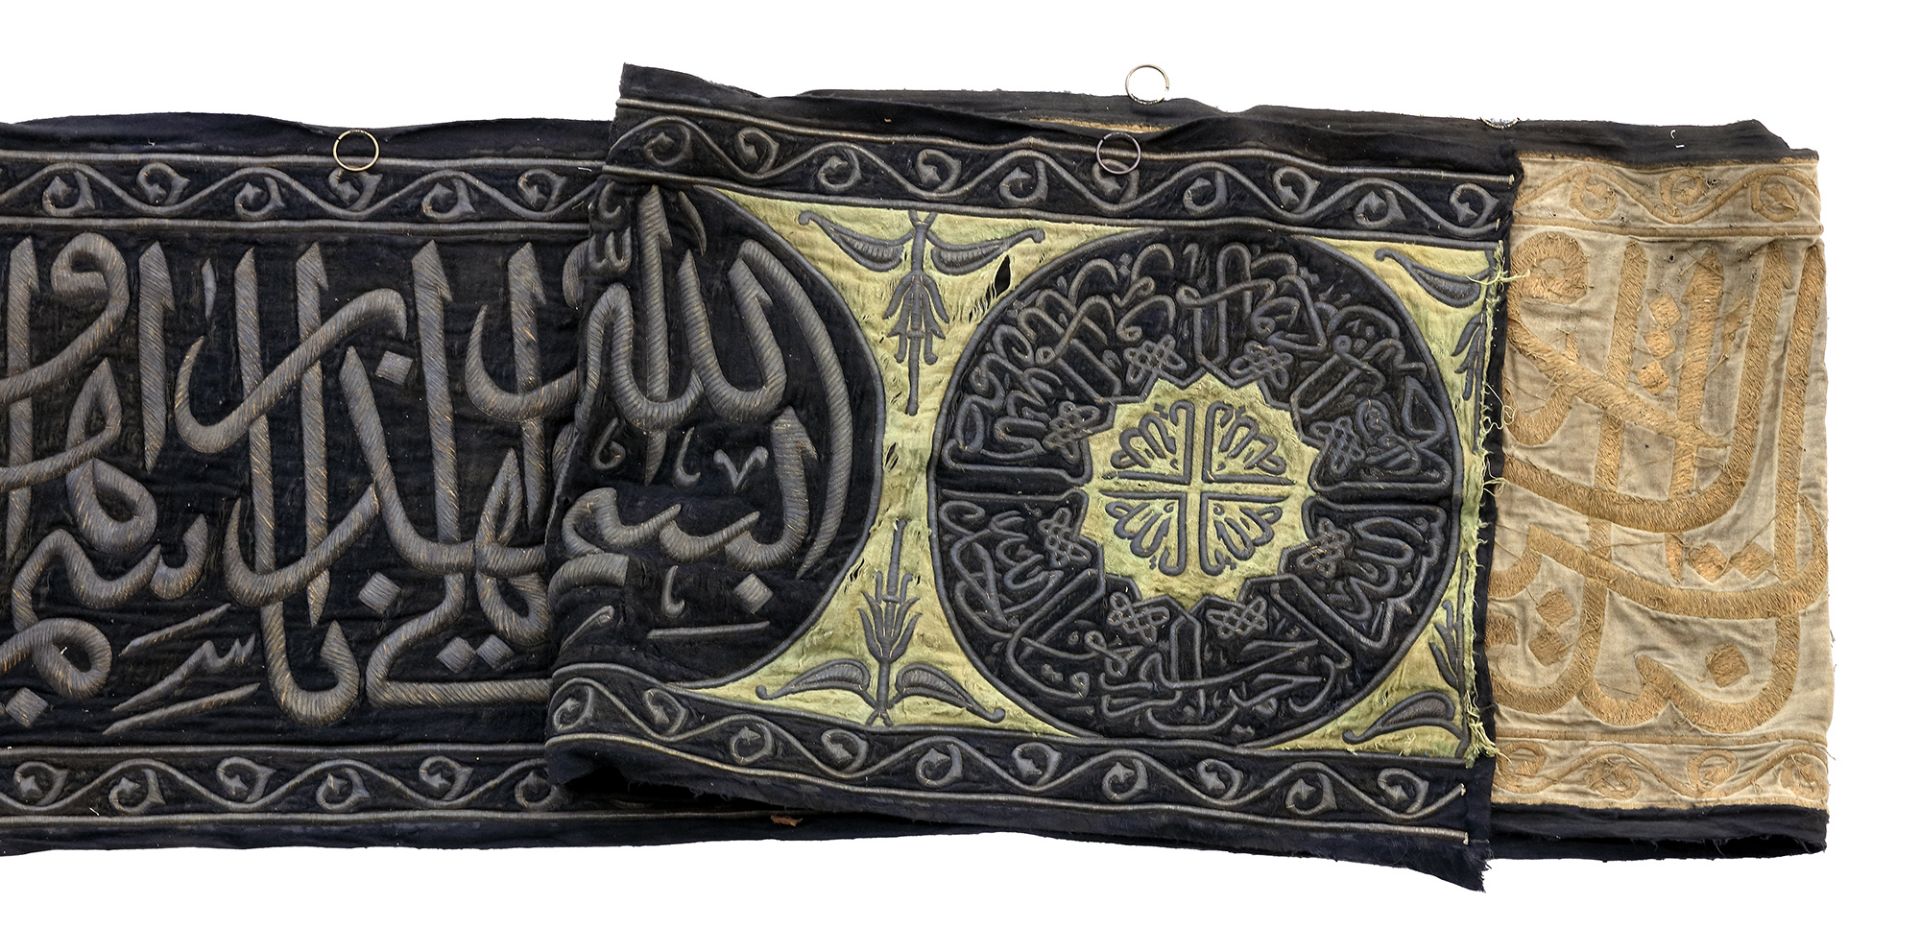 AN OTTOMAN METAL THREAD-EMBROIDERED HIZAM, EARLY 20TH CENTURY - Image 3 of 3